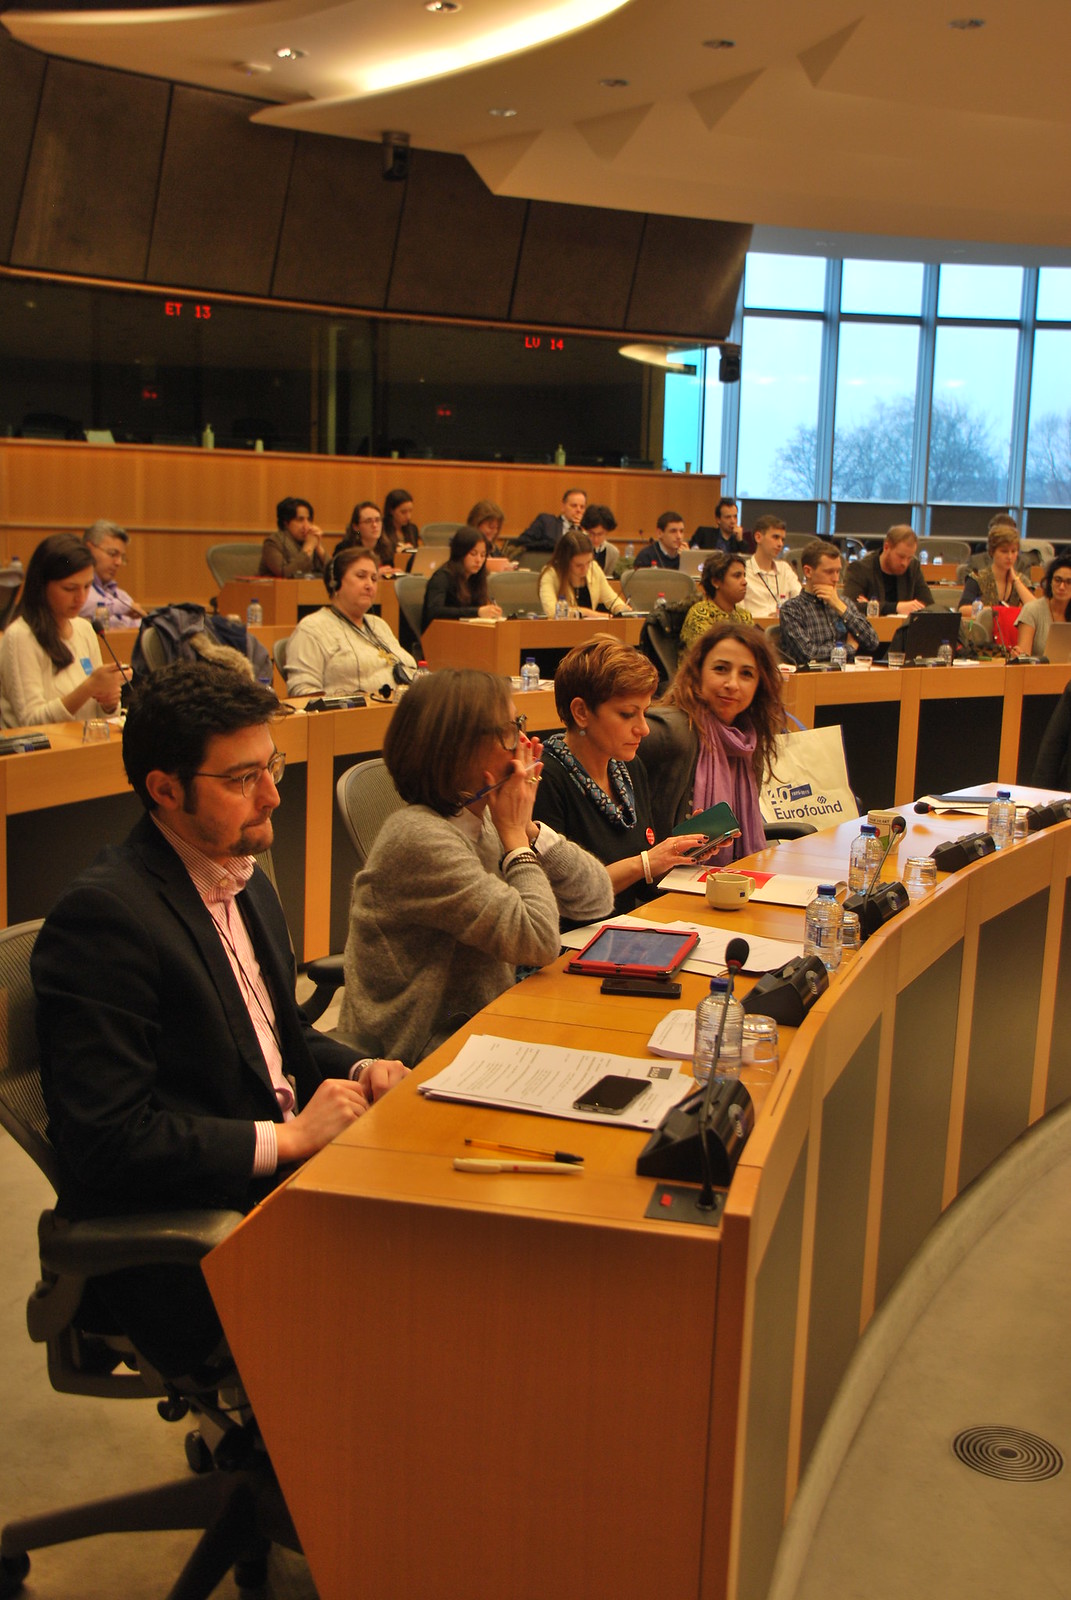 S&D Seminar: Equal Treatment and Rights for Migrant Workers & Labour Migration